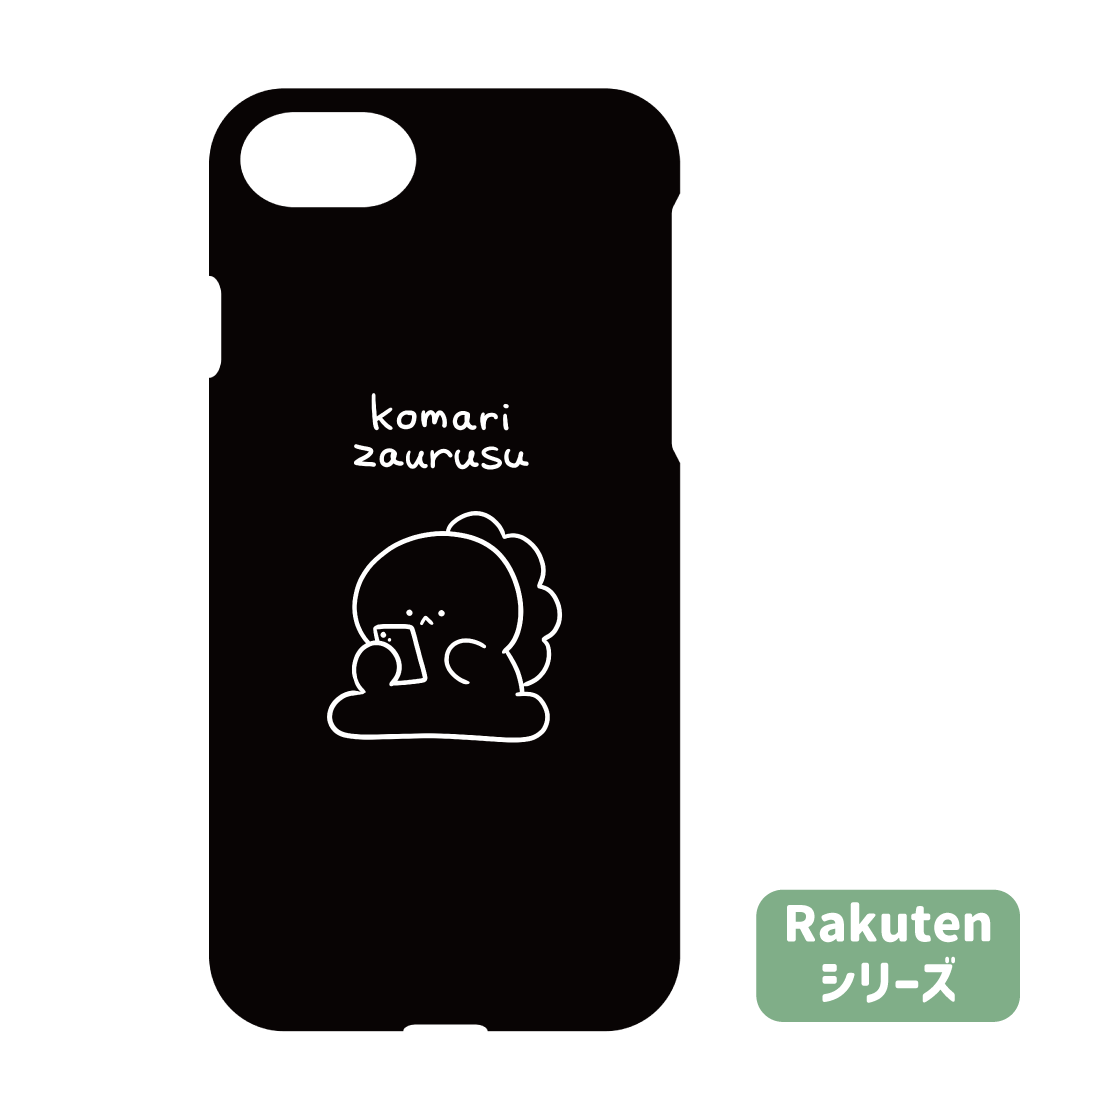 [Troublesome Zaurus] Smartphone case compatible with almost all models Rakuten Mobile Series (Troubled Zaurus) [Shipped in early June]